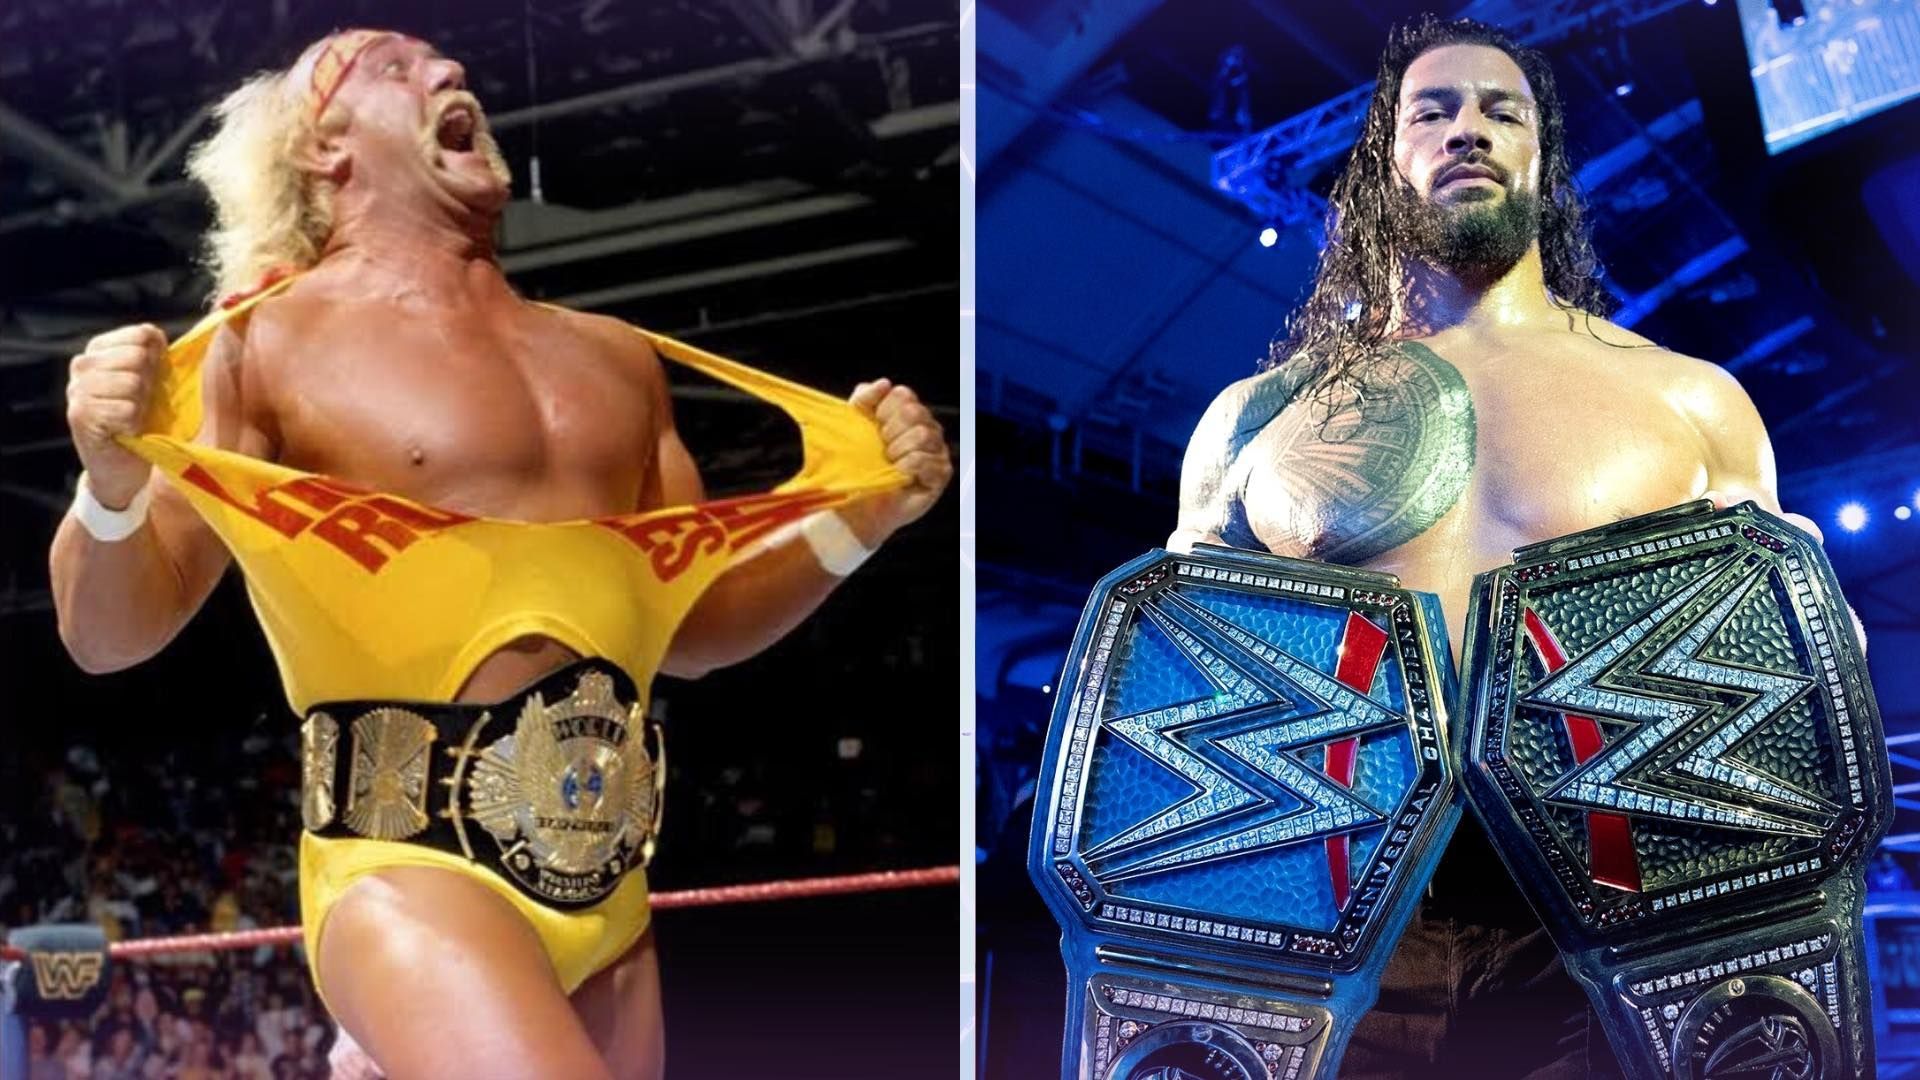 Roman Reigns and Hulk Hogan are iconic WWE Champions of different eras